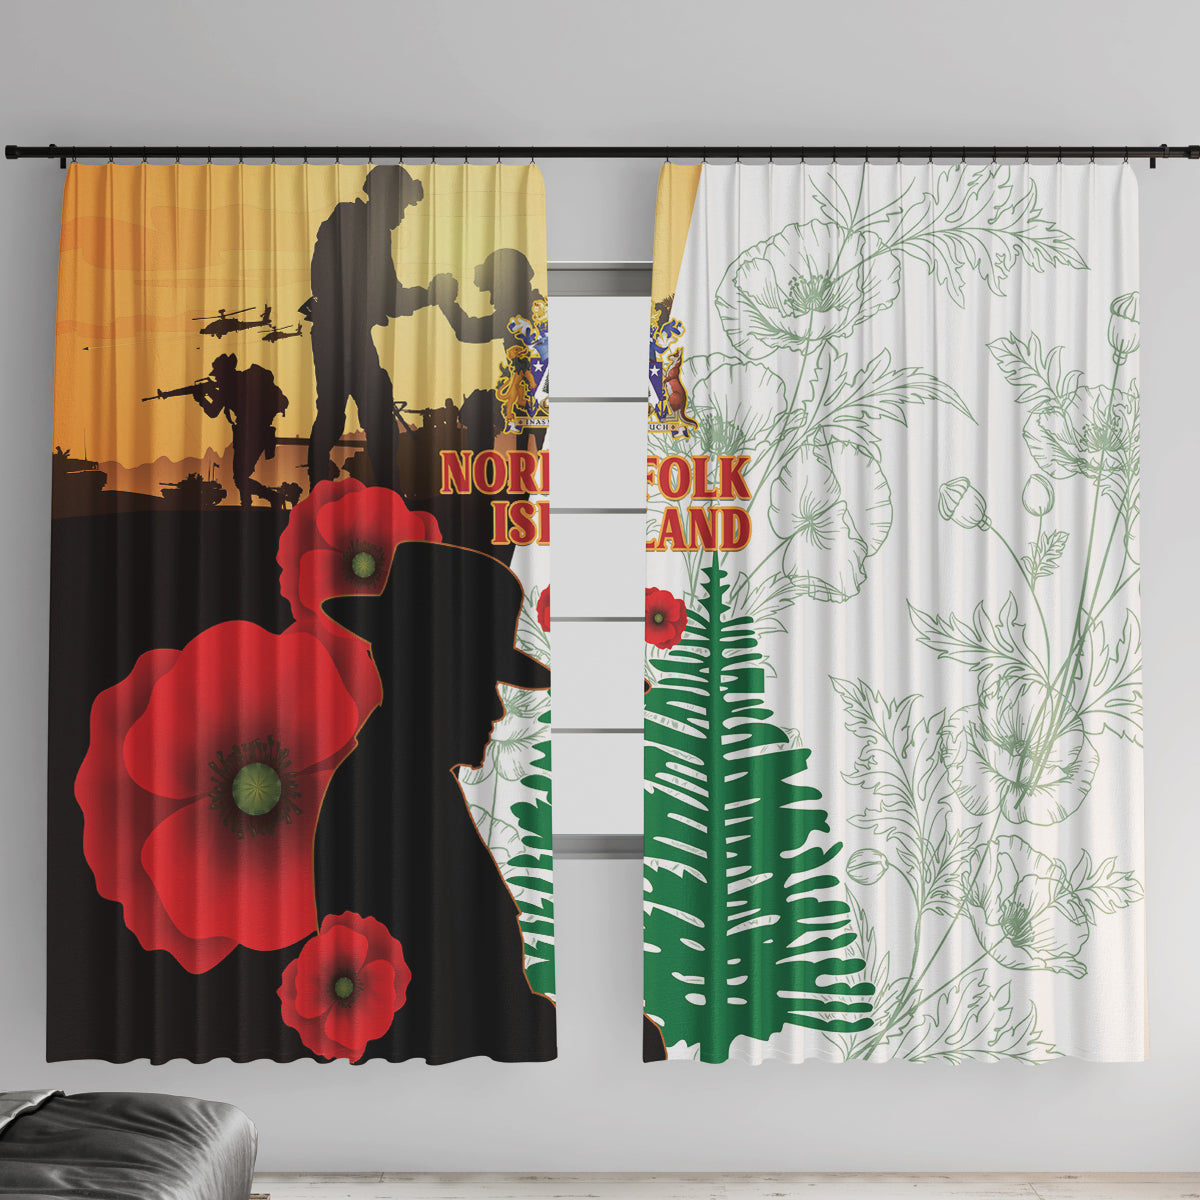 Norfolk Island ANZAC Day Window Curtain Pine Tree With Poppies Lest We Forget LT14 With Hooks White - Polynesian Pride